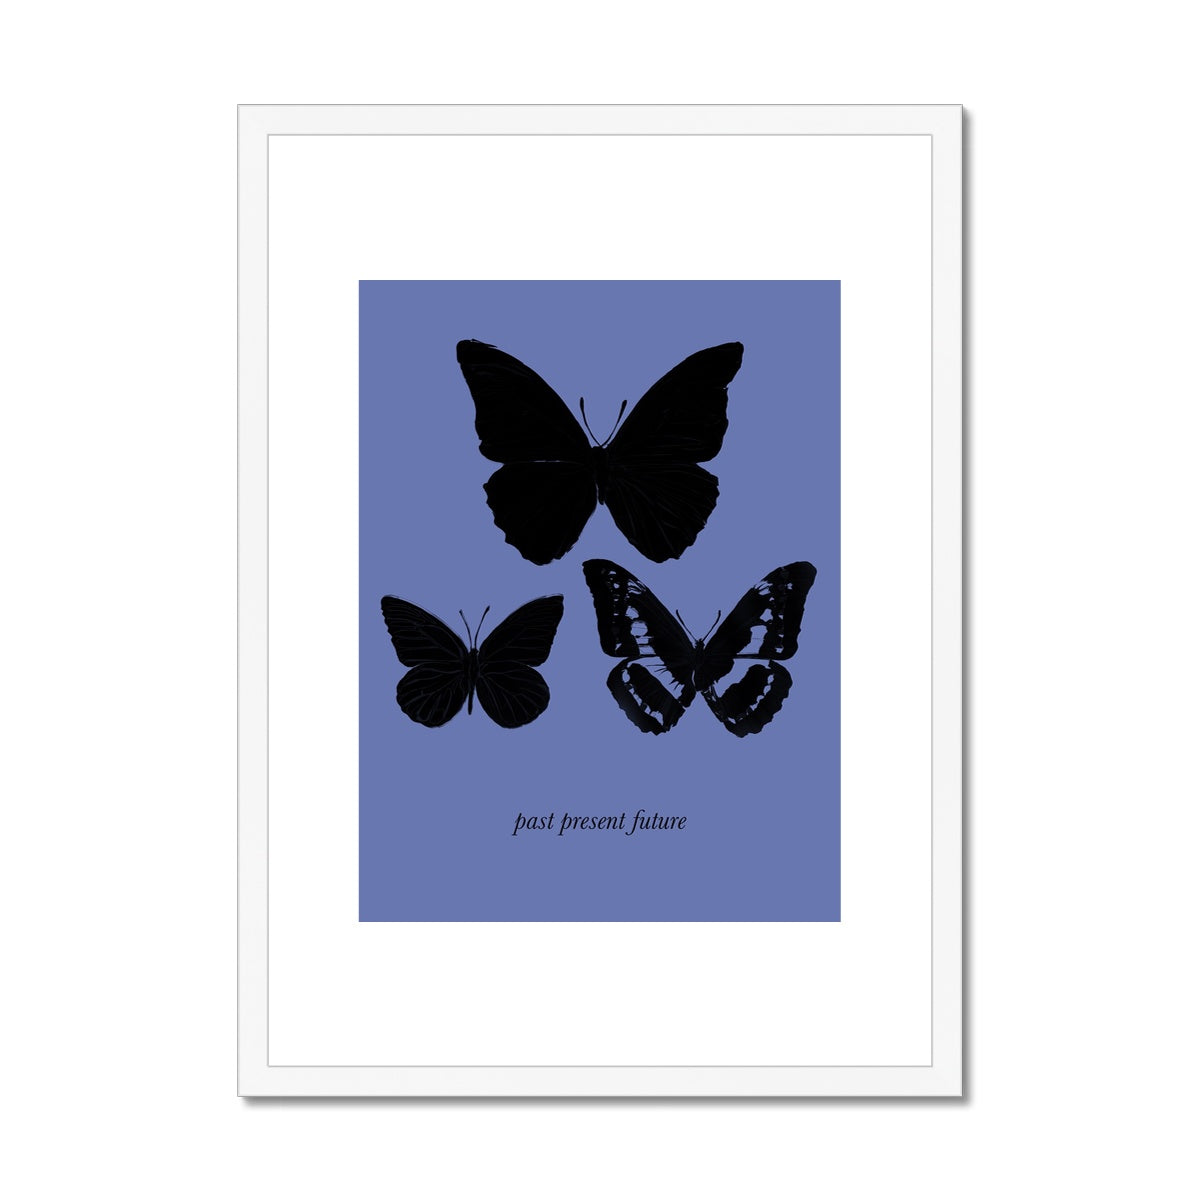 The Butterfly Effect / Past Present Future Framed & Mounted Print